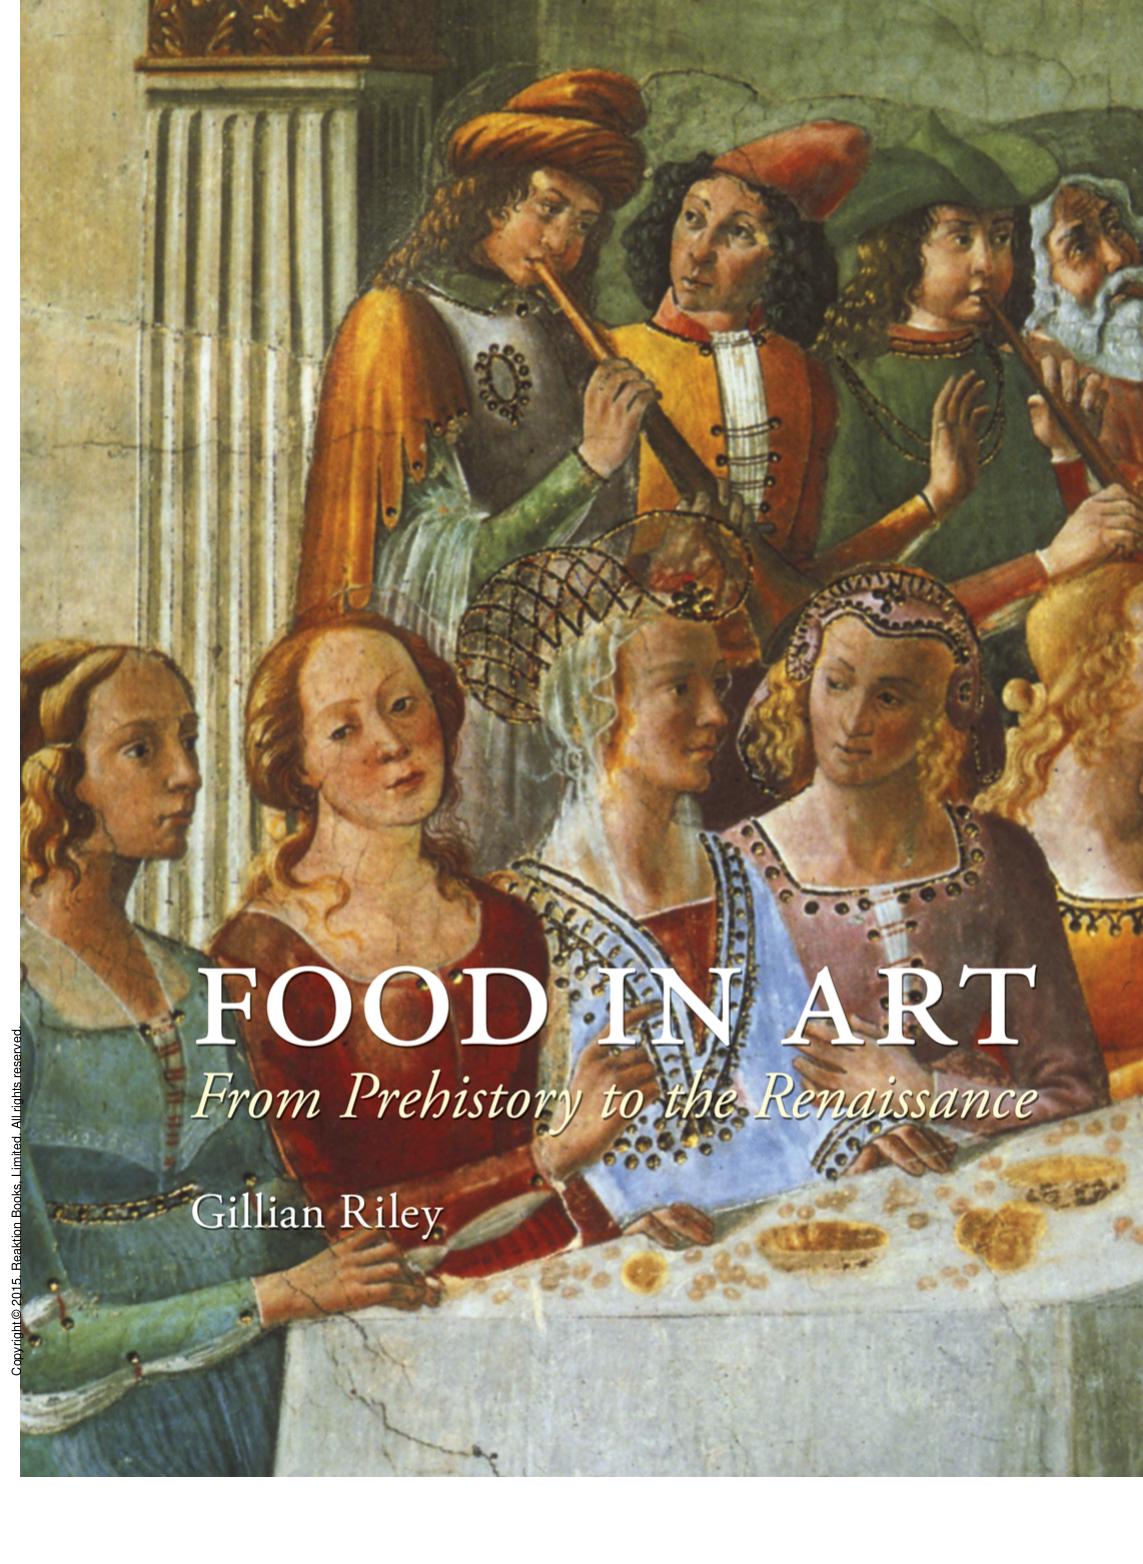 Food in Art : From Prehistory to the Renaissance by Gillian Riley